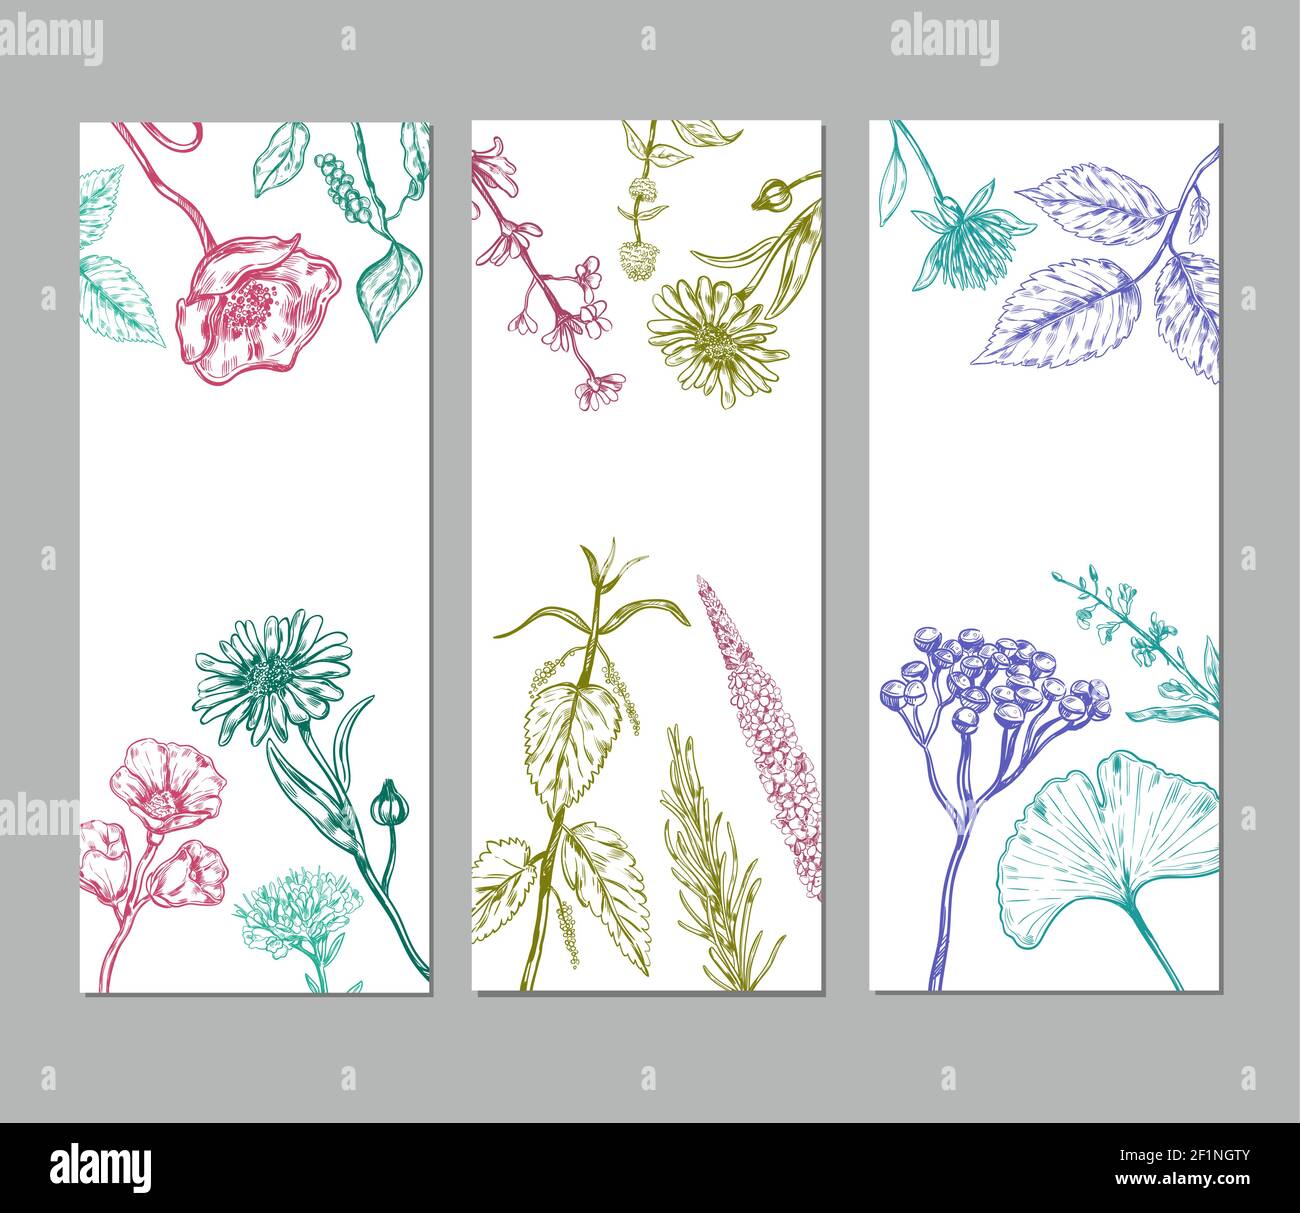 Sketch herbal vertical banners with medicinal organic herbs valuable for human health Stock Vector